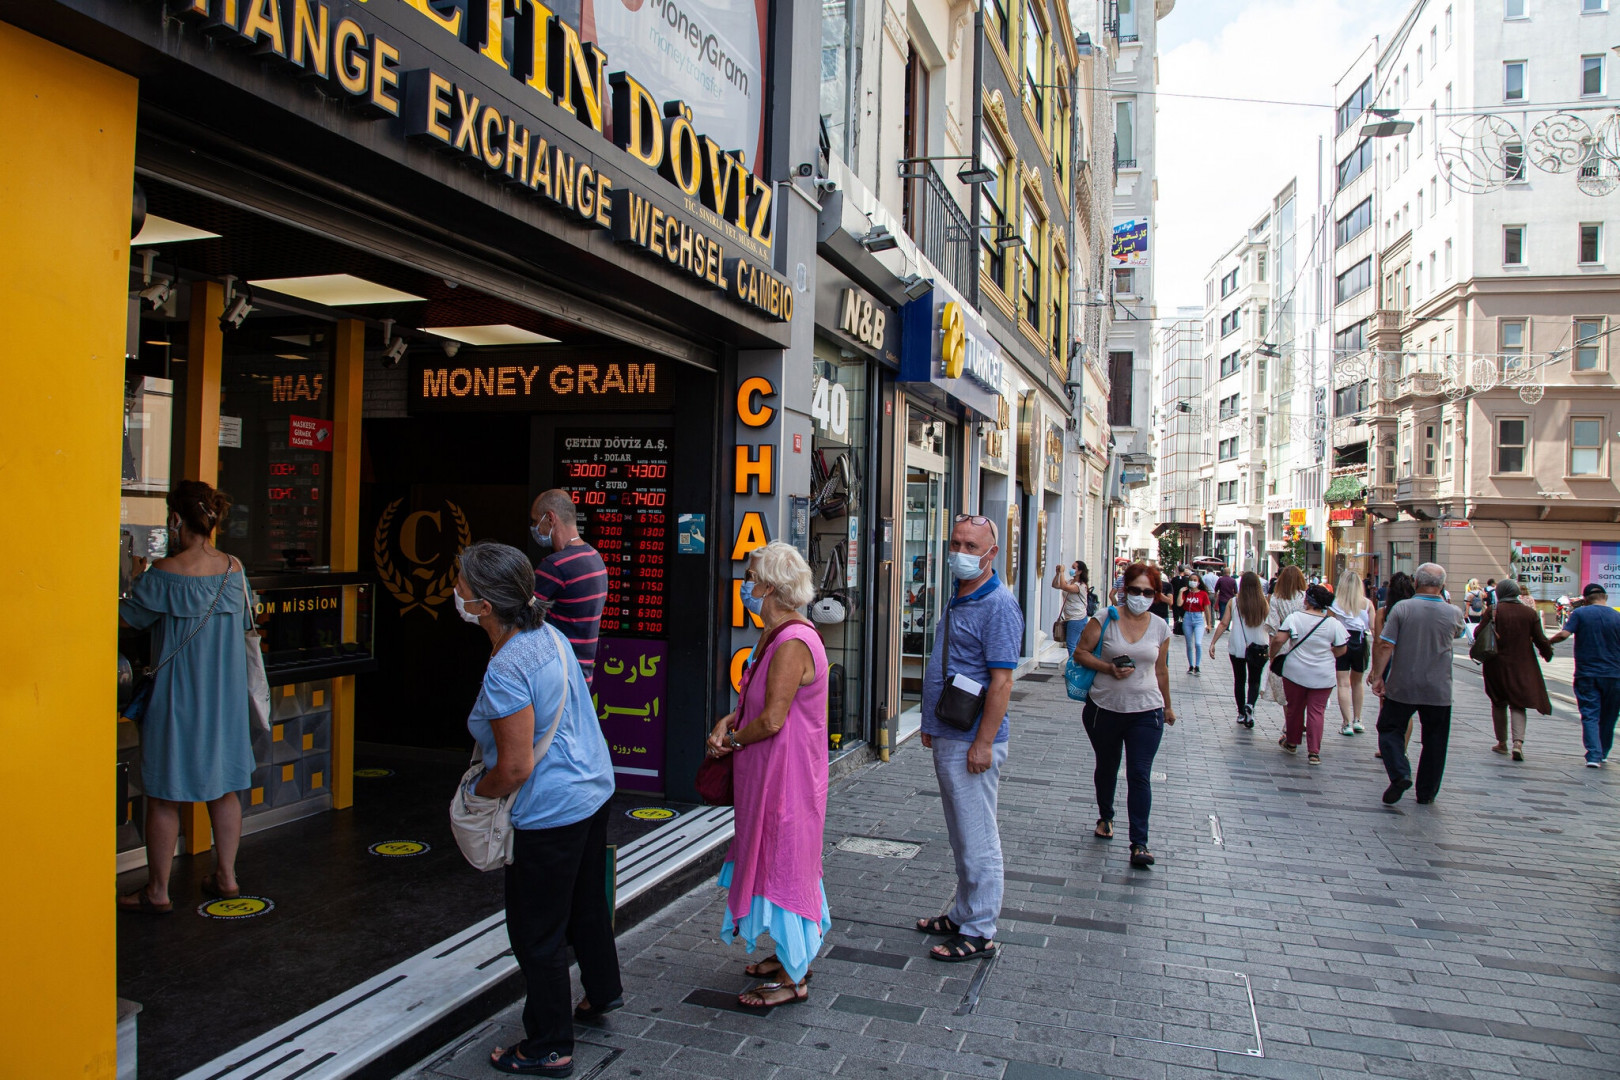 NY times: Turkey Braces for Yet another Currency Crisis